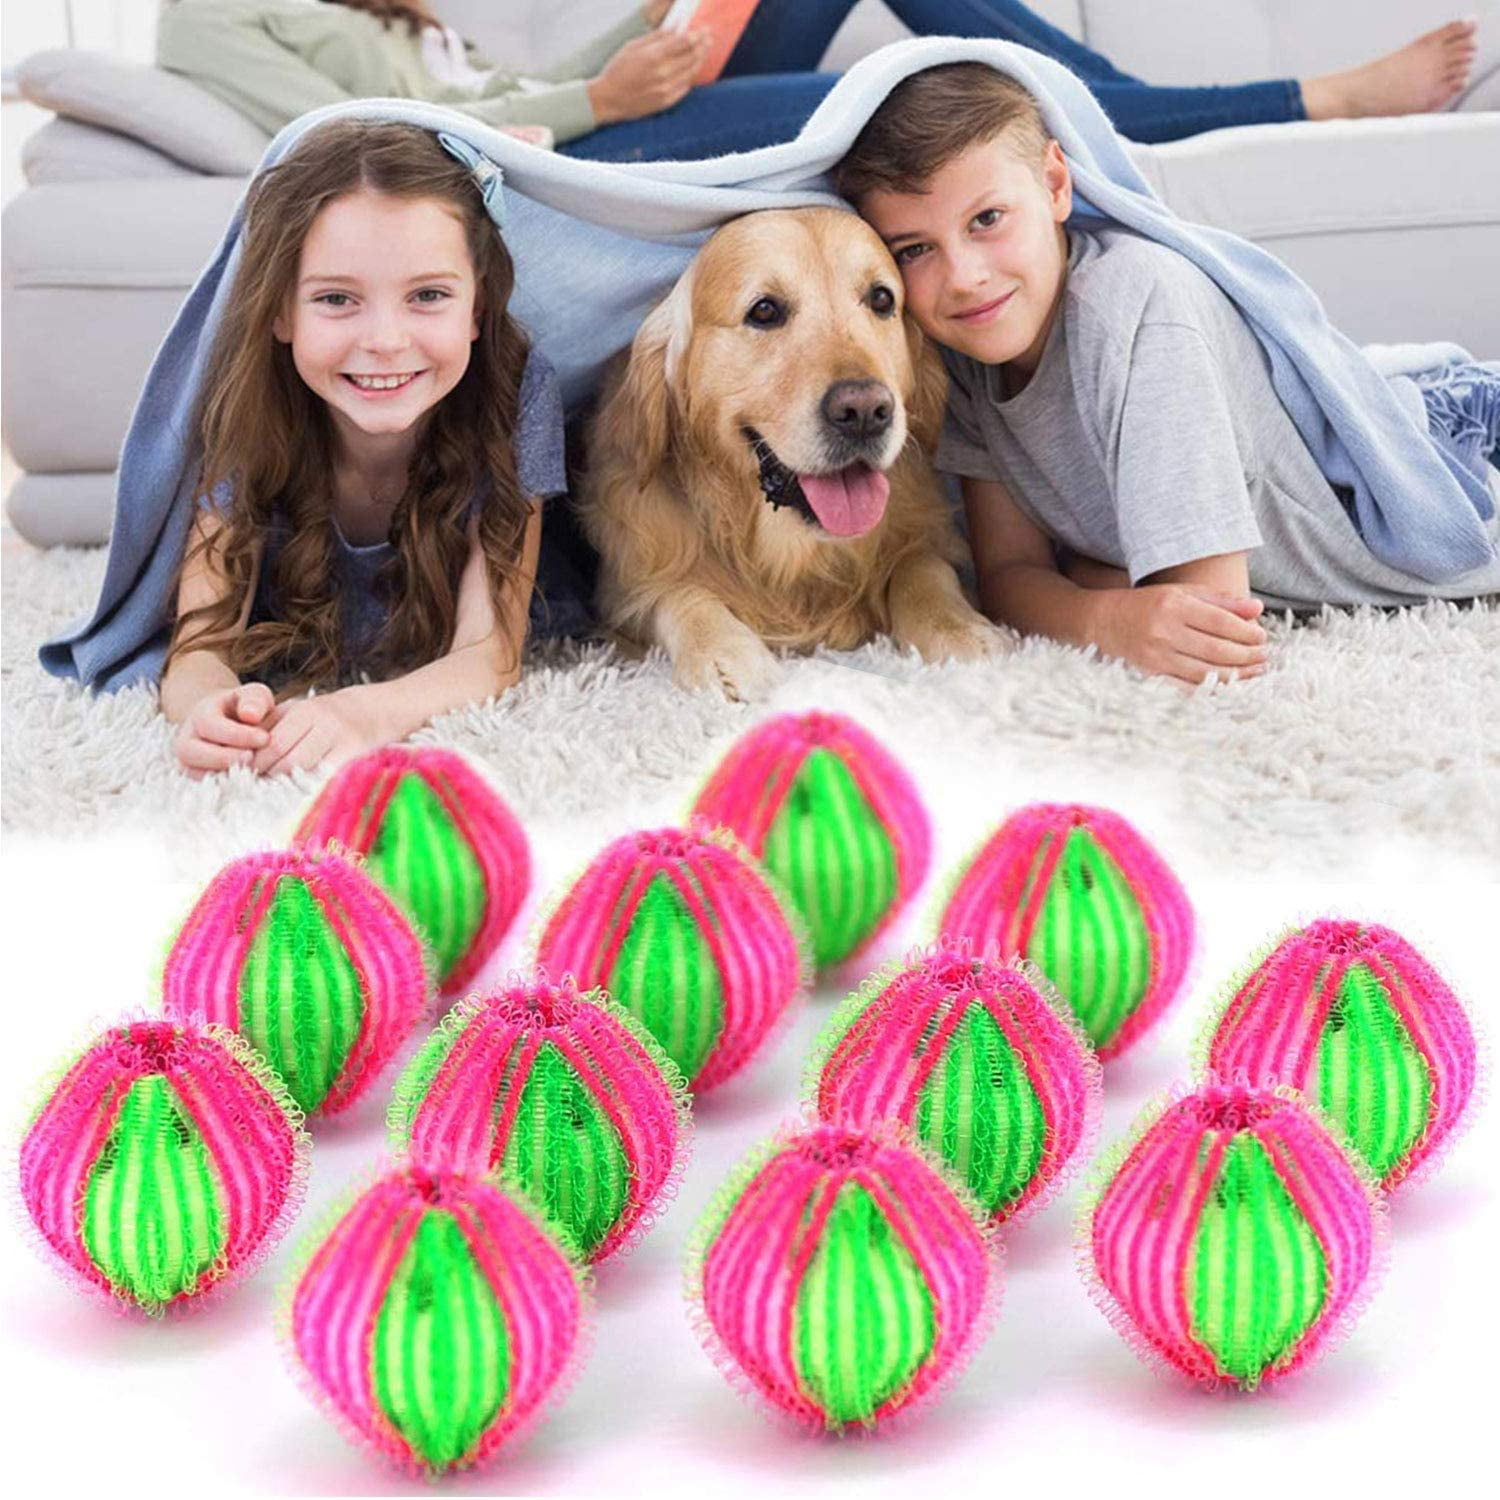 Pet Hair Remover Ball For Laundry, Reusable Laundry Lint Remover, Washing  Machine Hair Catcher, Pet Hair Catcher, Washing Dryer Balls For Clothes,  Dog Cat Pet Fur Remover, Laundry Ball, Cleaning Supplies, Cleaning